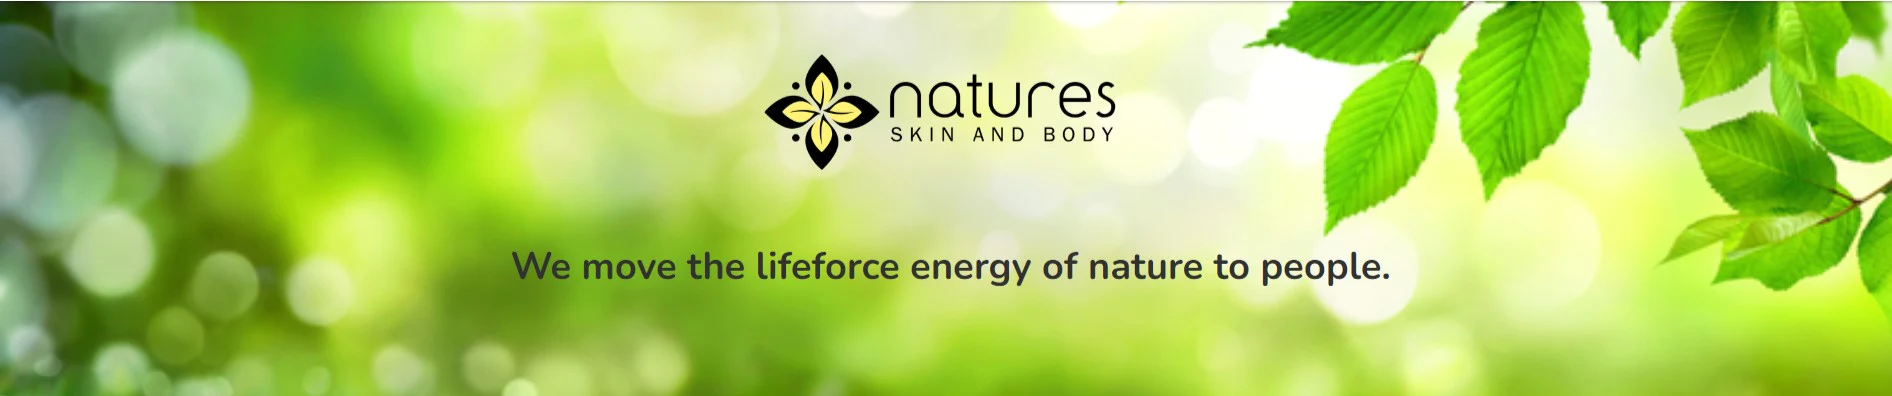 Access exclusive deals, coupons, offers and cashback on Reveal Radiant Skin with Nature's Skin And Body Food through OODLZ courtesy of Nature's Skin And Body Food.